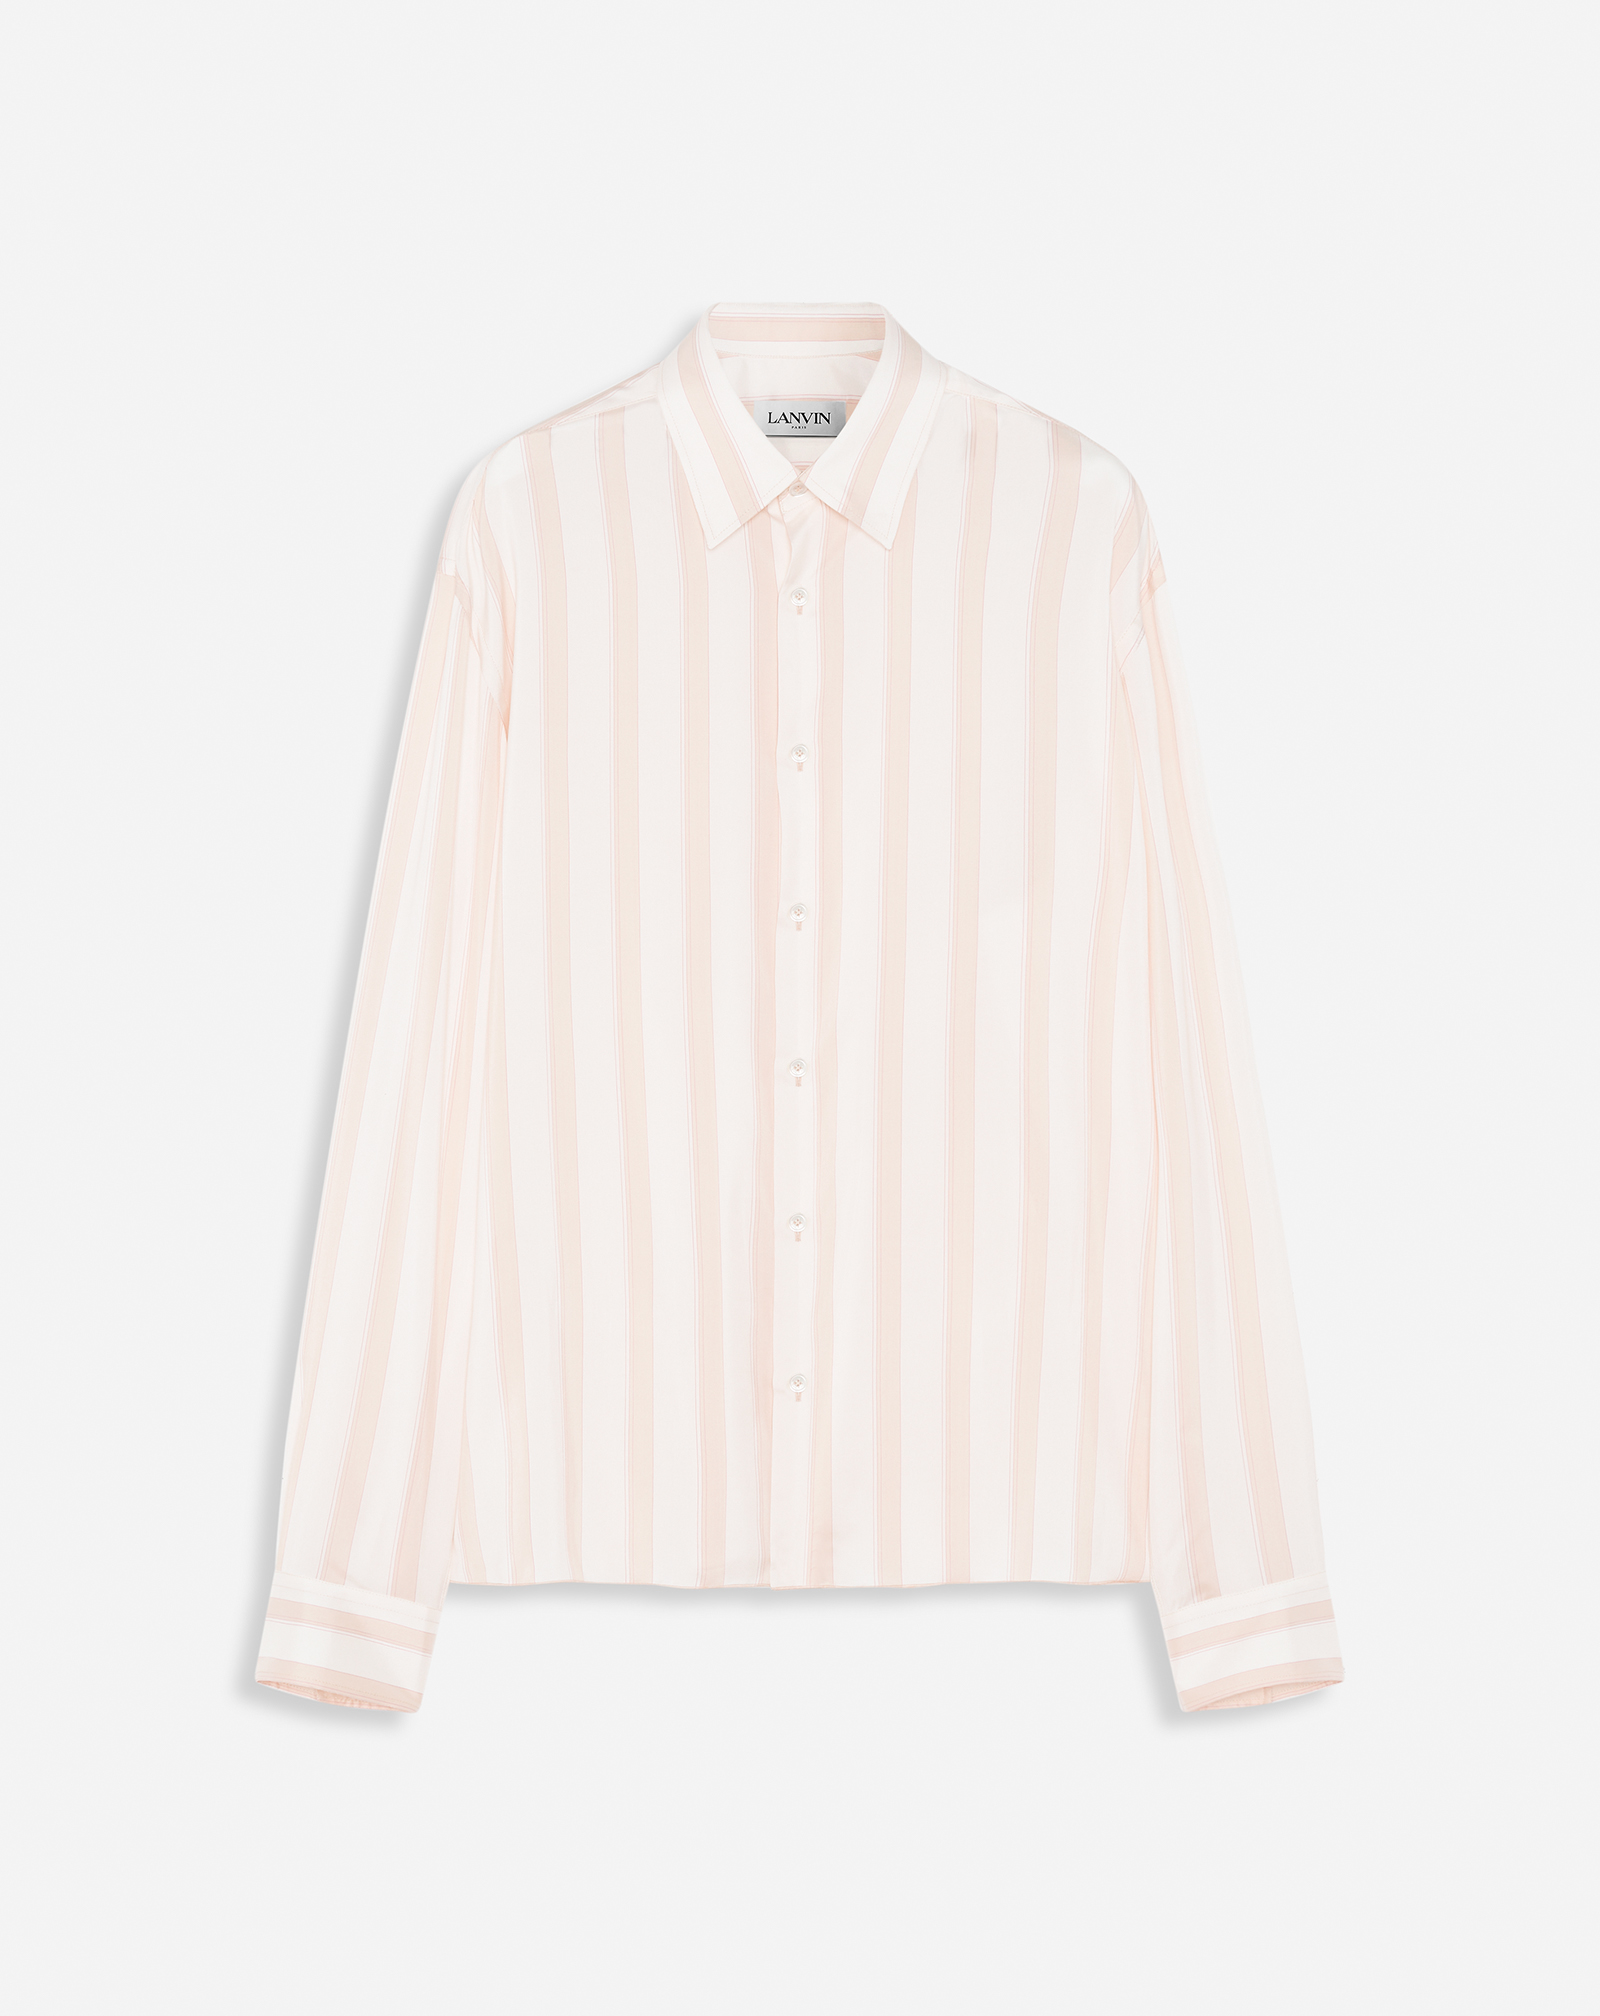 Lanvin Classic Striped Shirt For Men In Pink